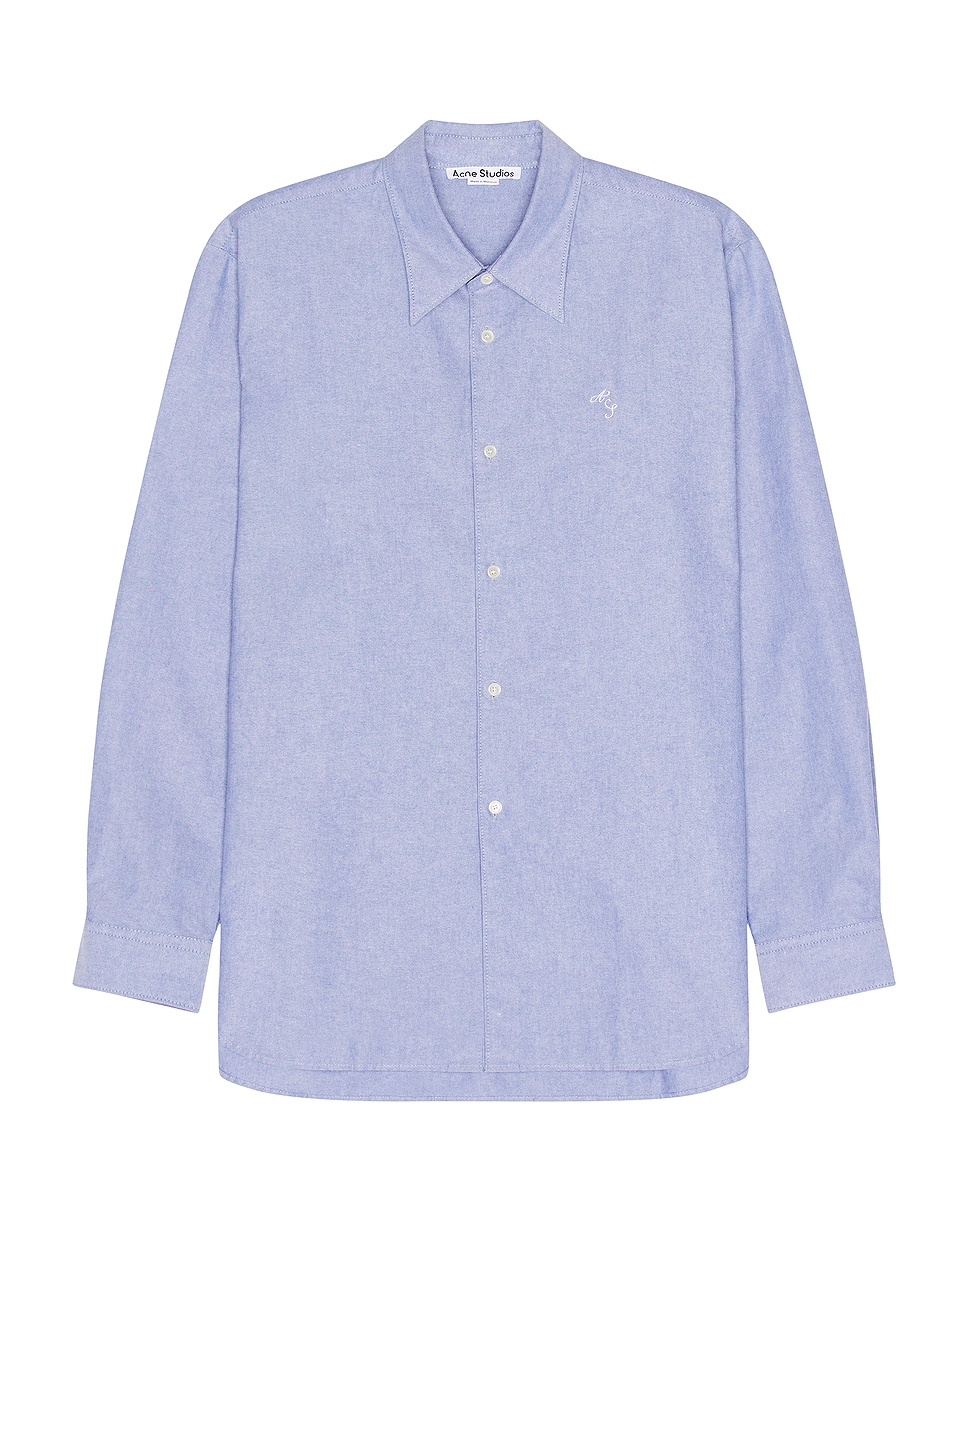 Image 1 of Acne Studios Shirt in Blue